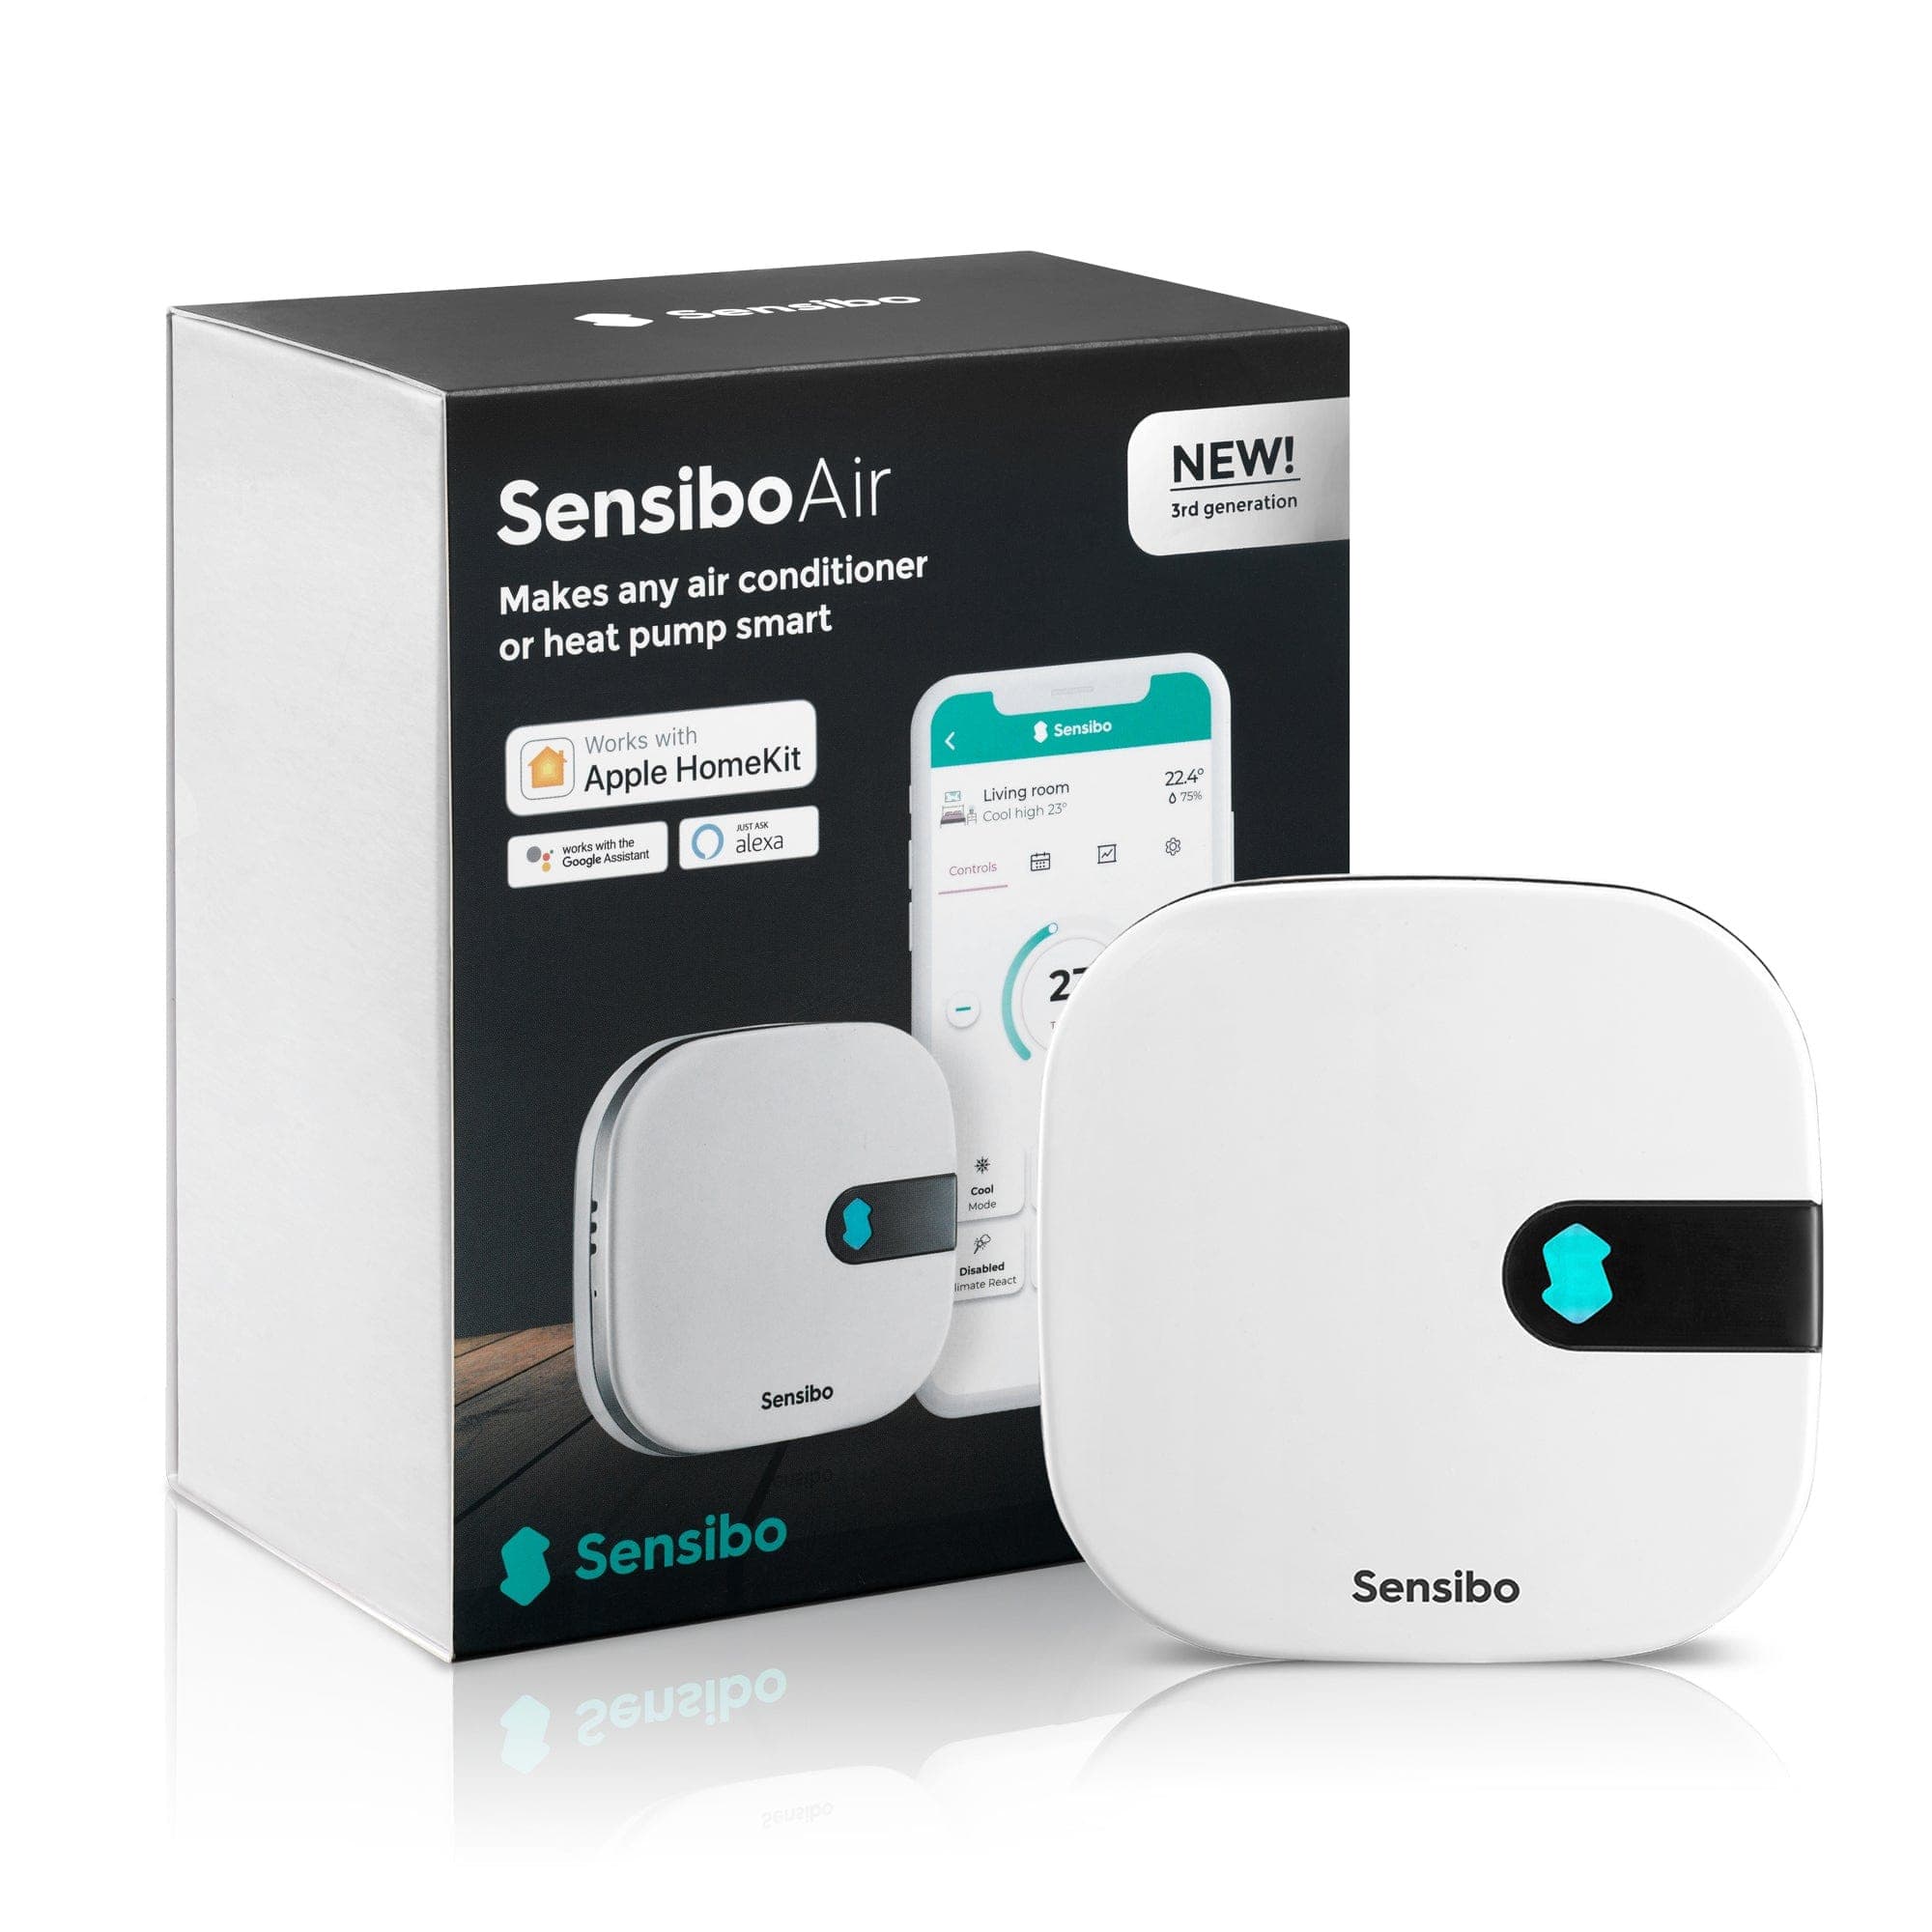 The Sensibo SKY turns most air conditioners into smart home